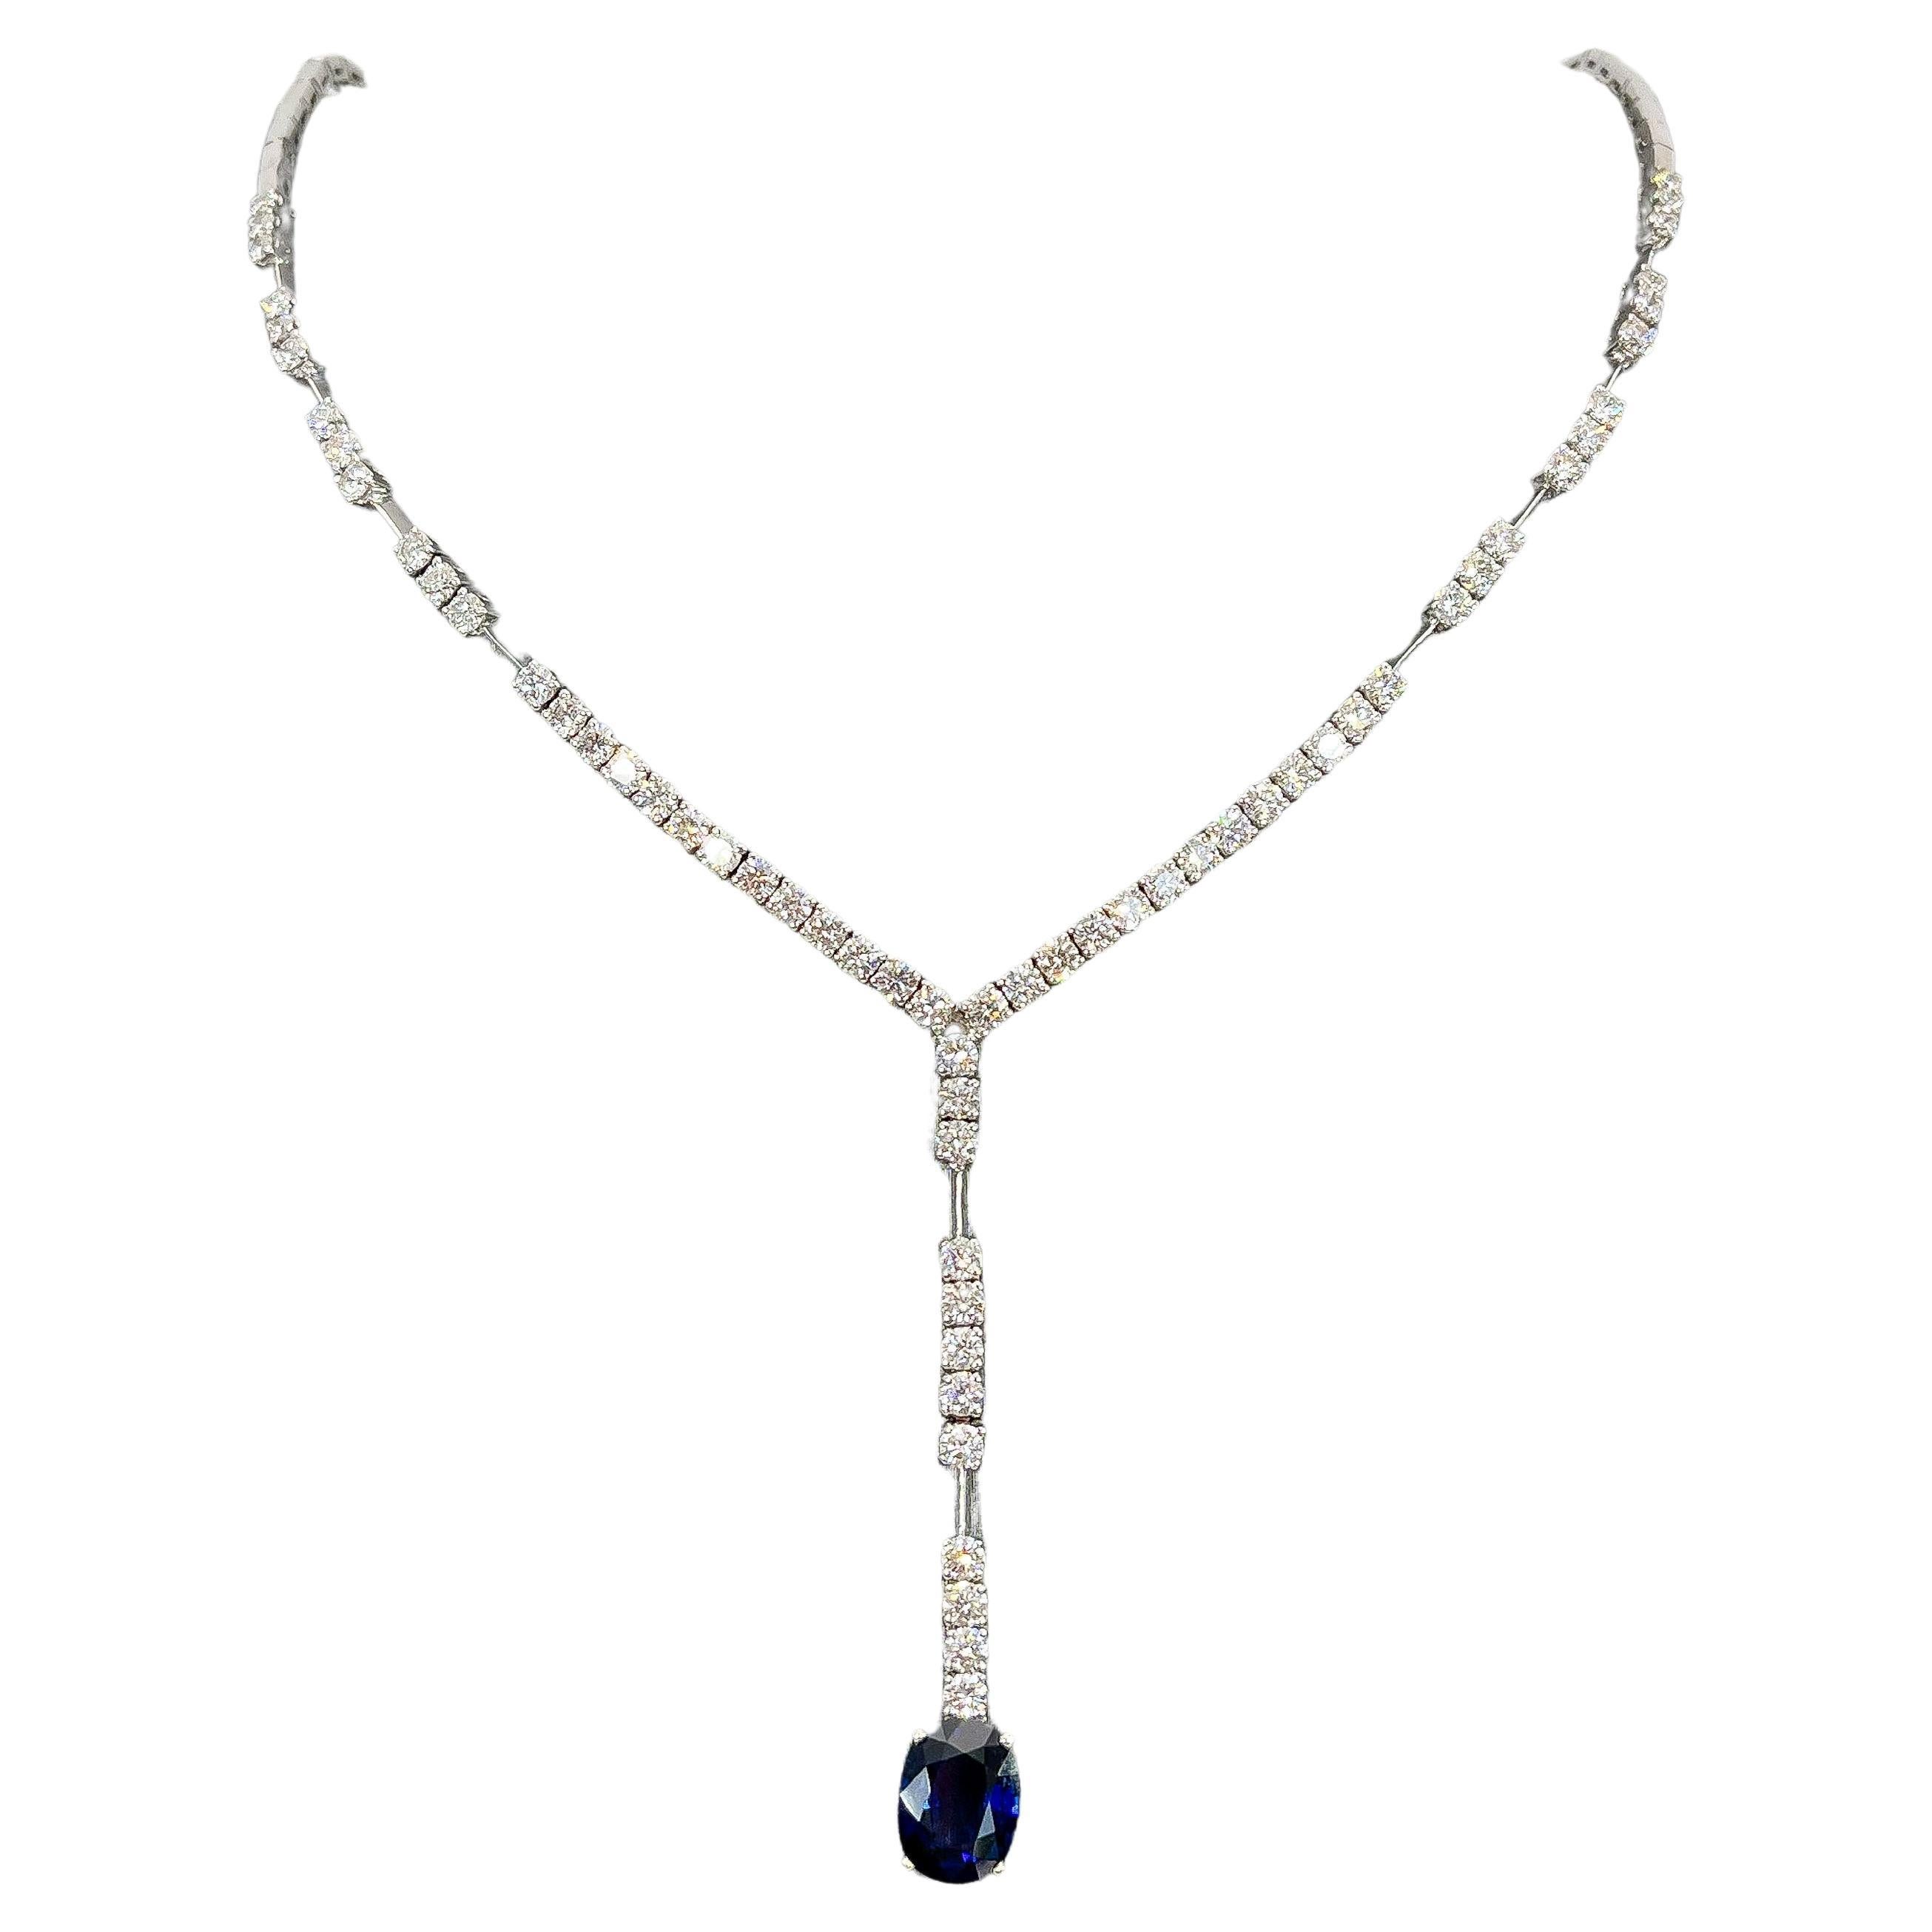 18K White Gold 3.32 CT Sapphire and 7 CTW Diamond "Y" Necklace